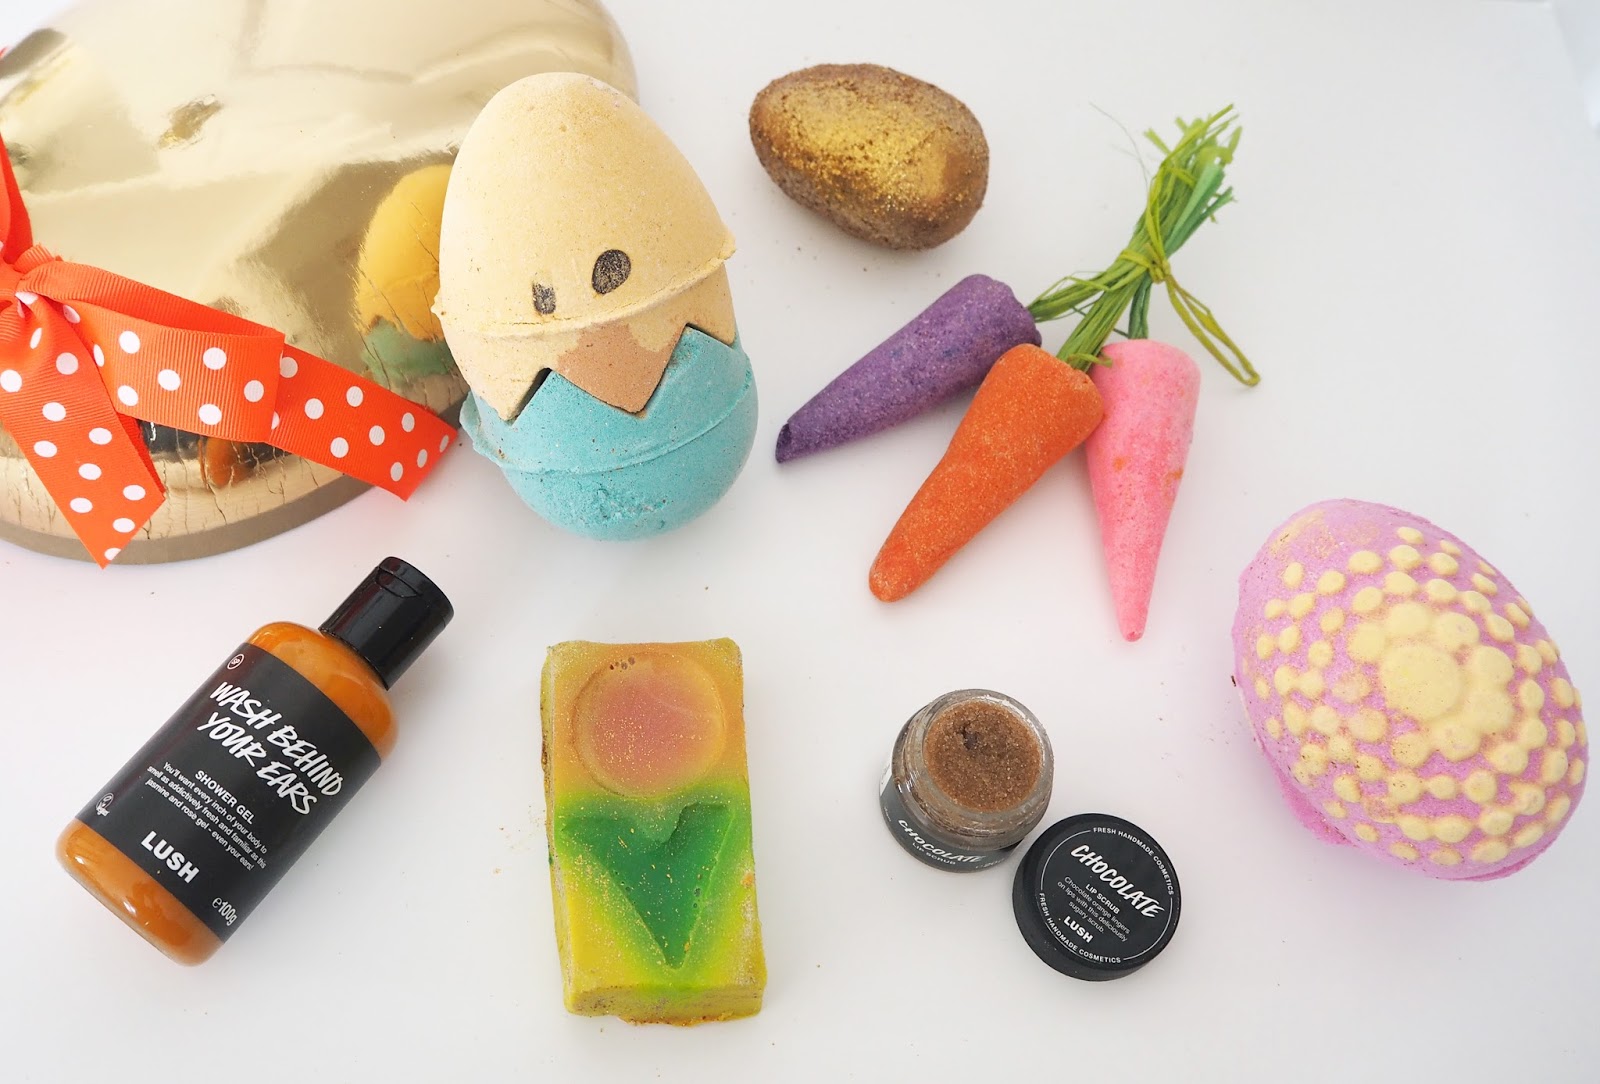 Lush Easter Collection 2017,  Katie Kirk Loves, Lush Cosmetics UK, Lush 2017, Beauty Blogger, UK Blogger, Gifts For Her, Easter Gifts, Gift Ideas, Lush Review, Lush Gifts, Bath & Body Products, Blogger Review